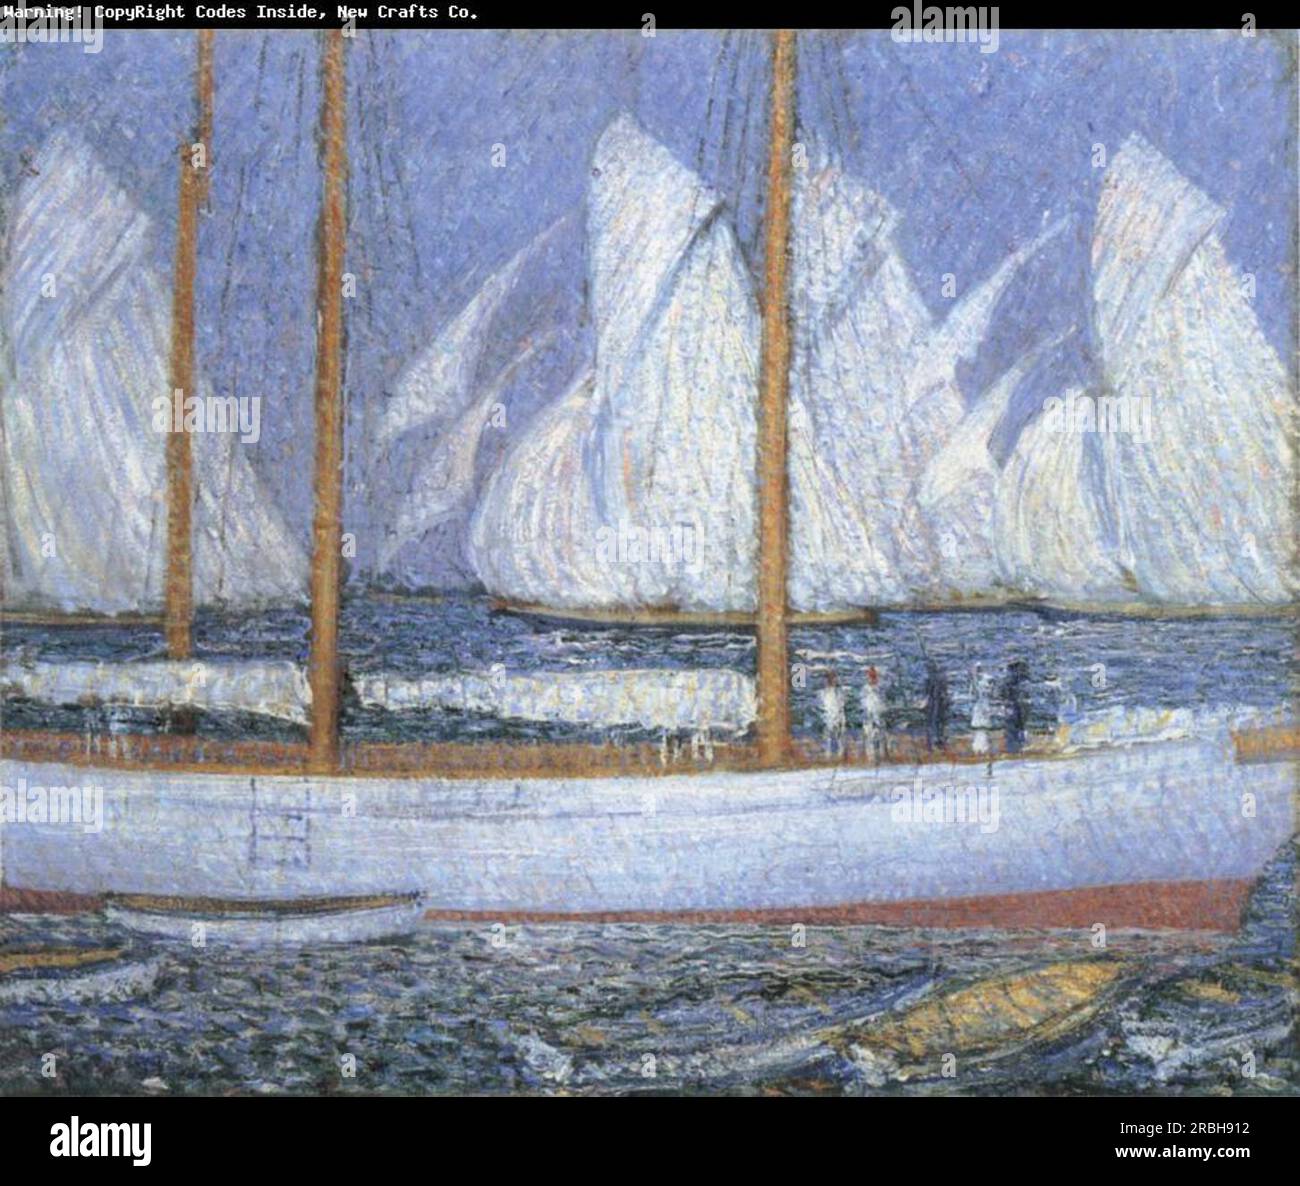 A Procession of Yachts by Philip Wilson Steer Stock Photo